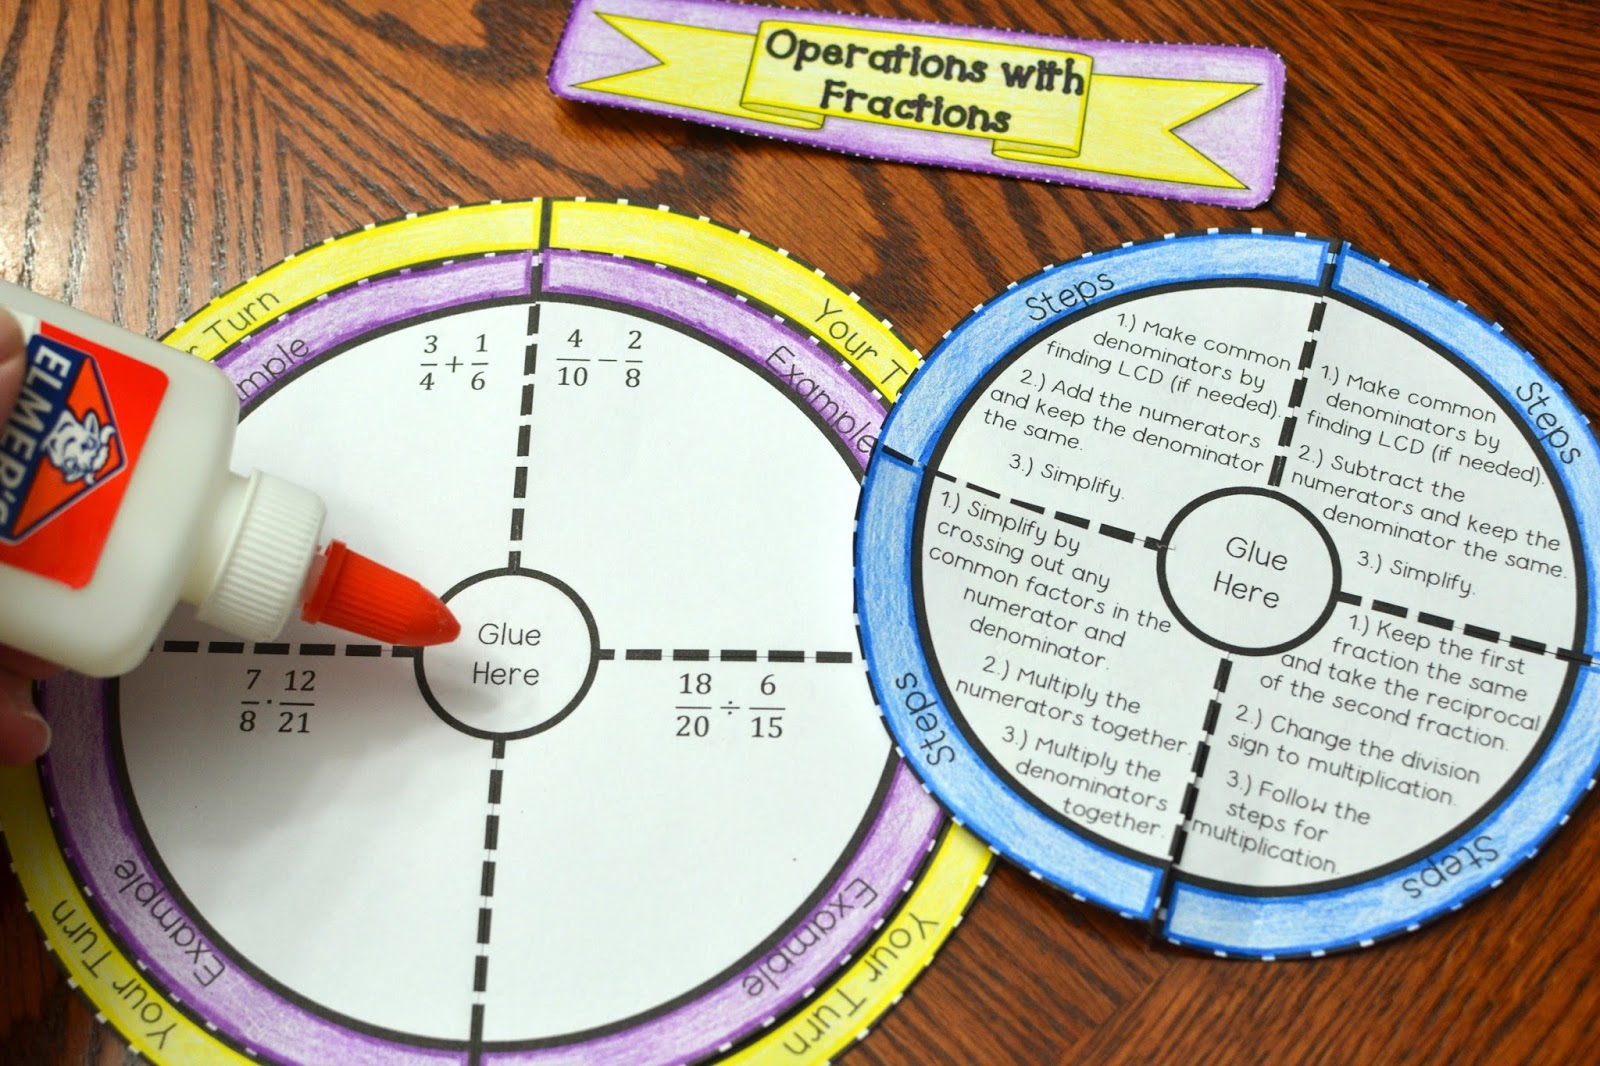 math-in-demand-operations-with-fractions-wheel-foldable-adding